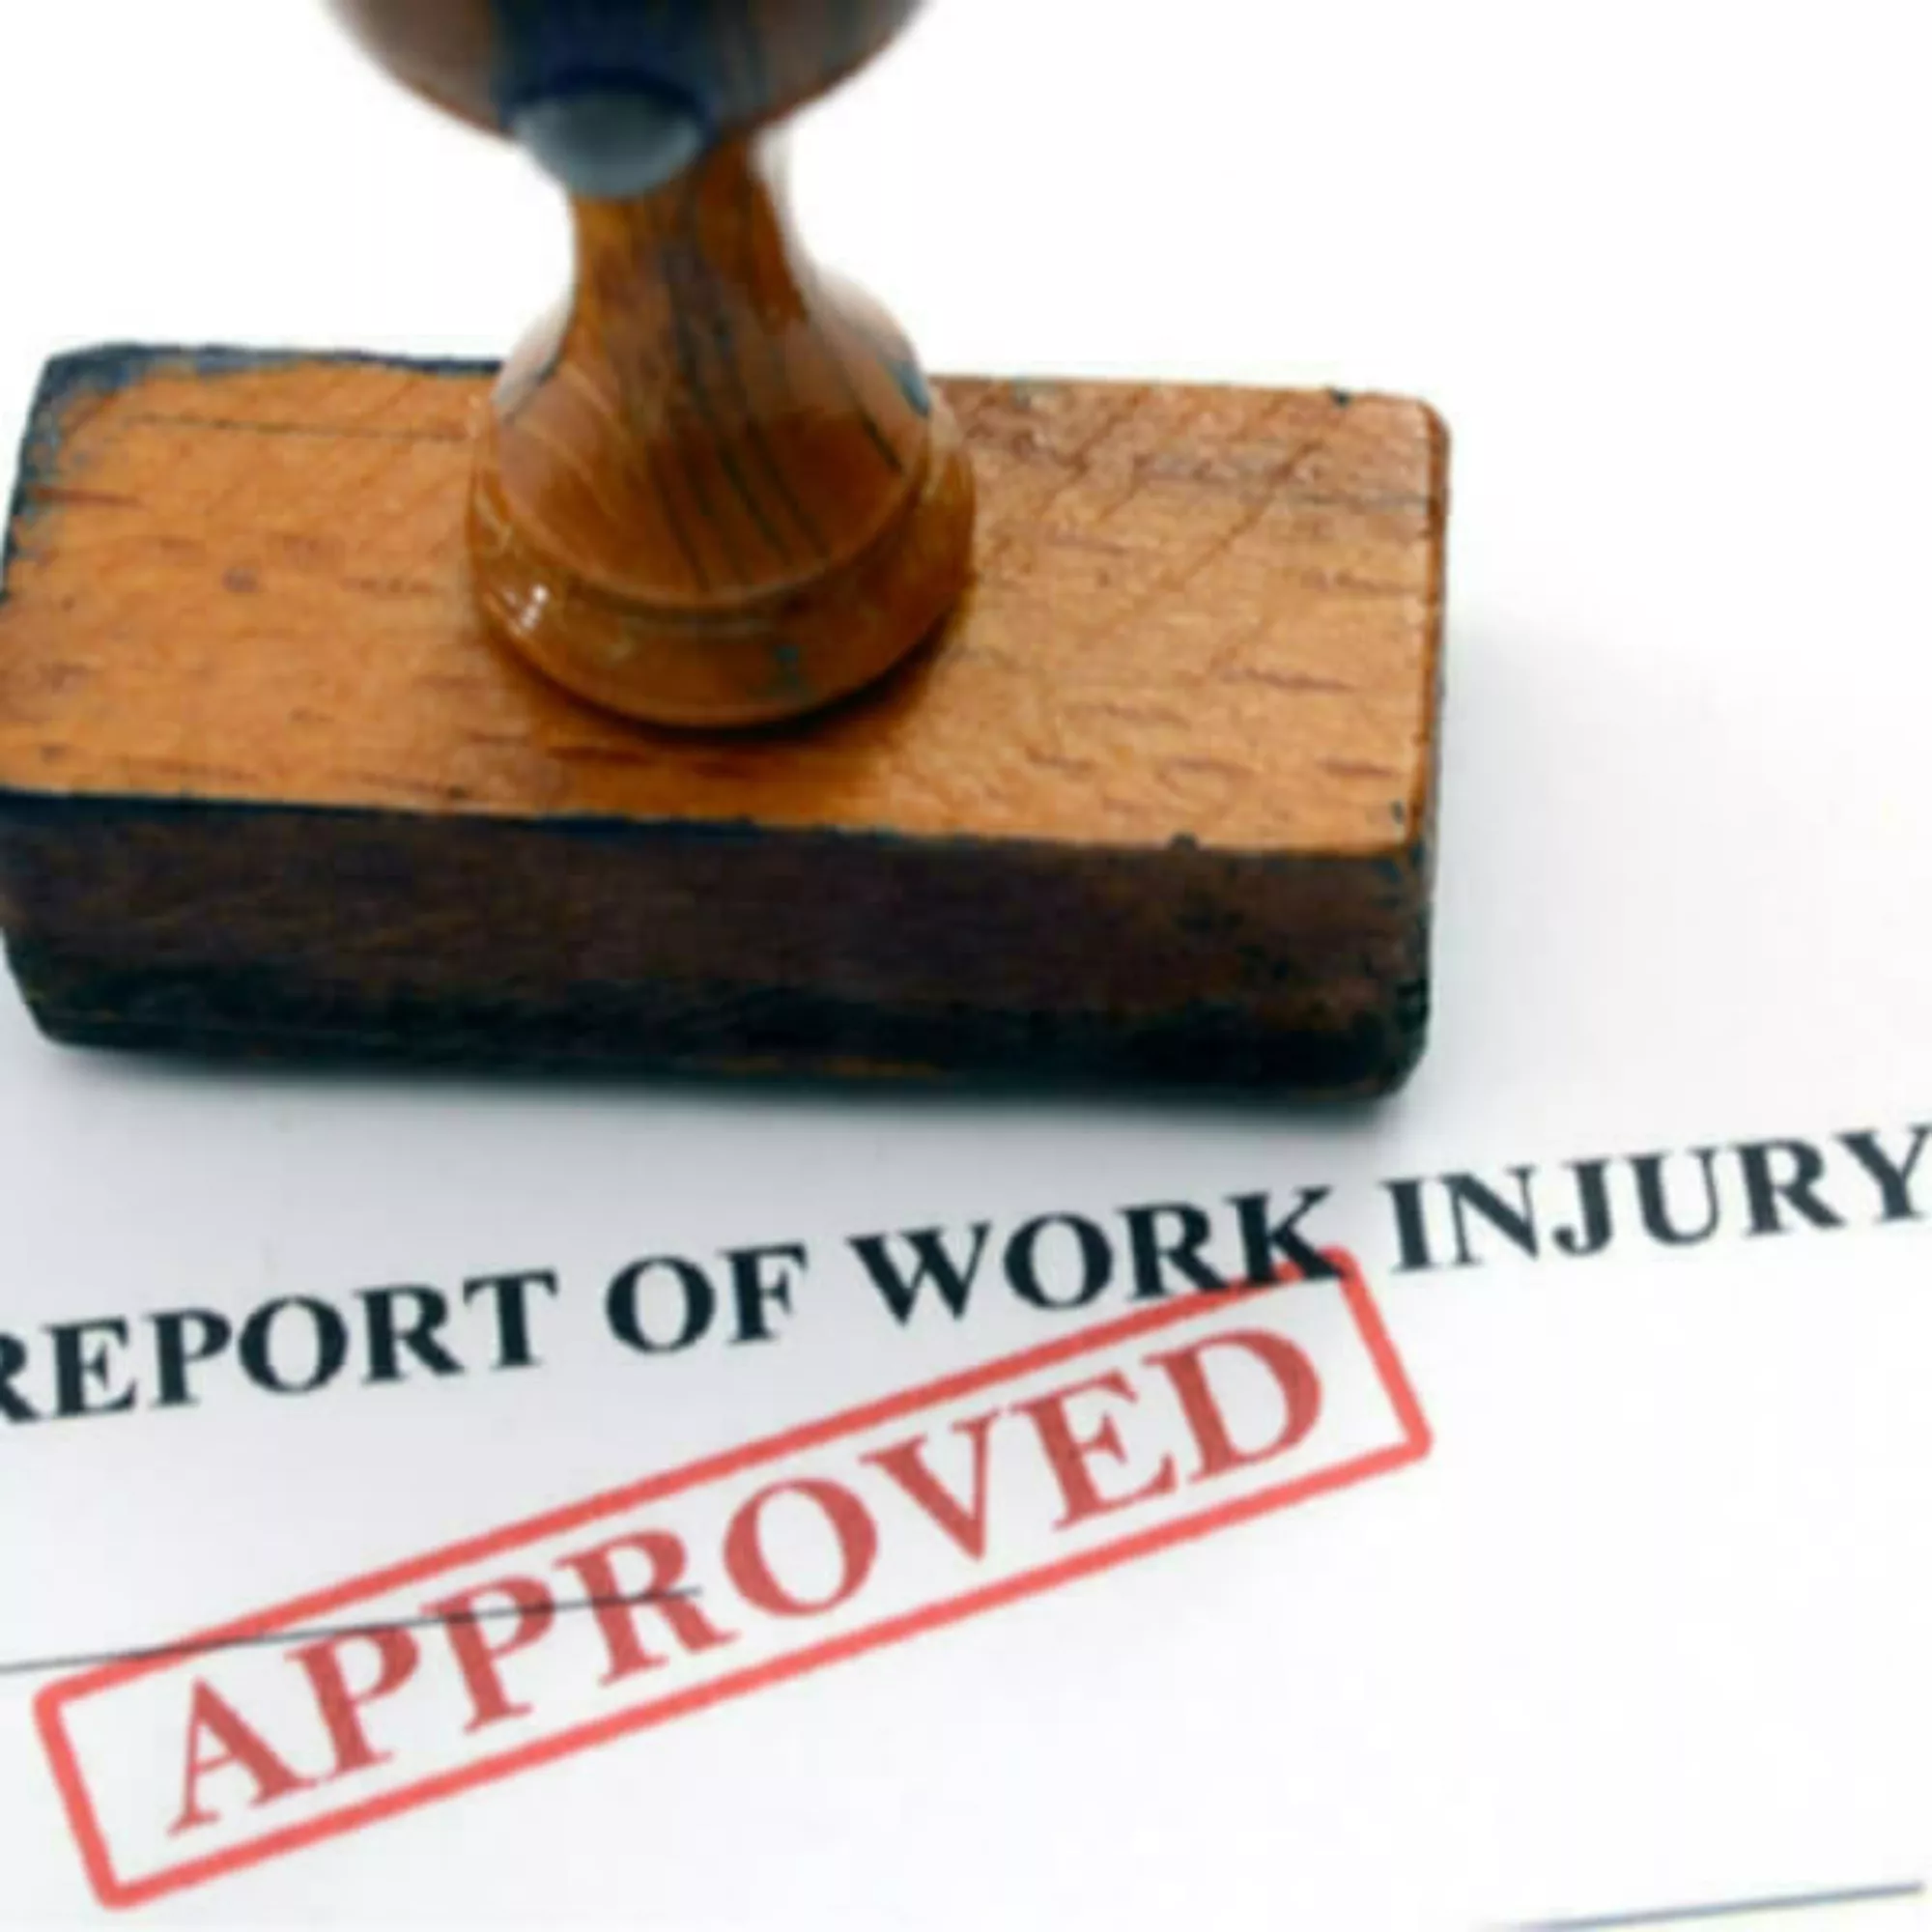 "Report of work injury" for with red "APPROVED" stamp.